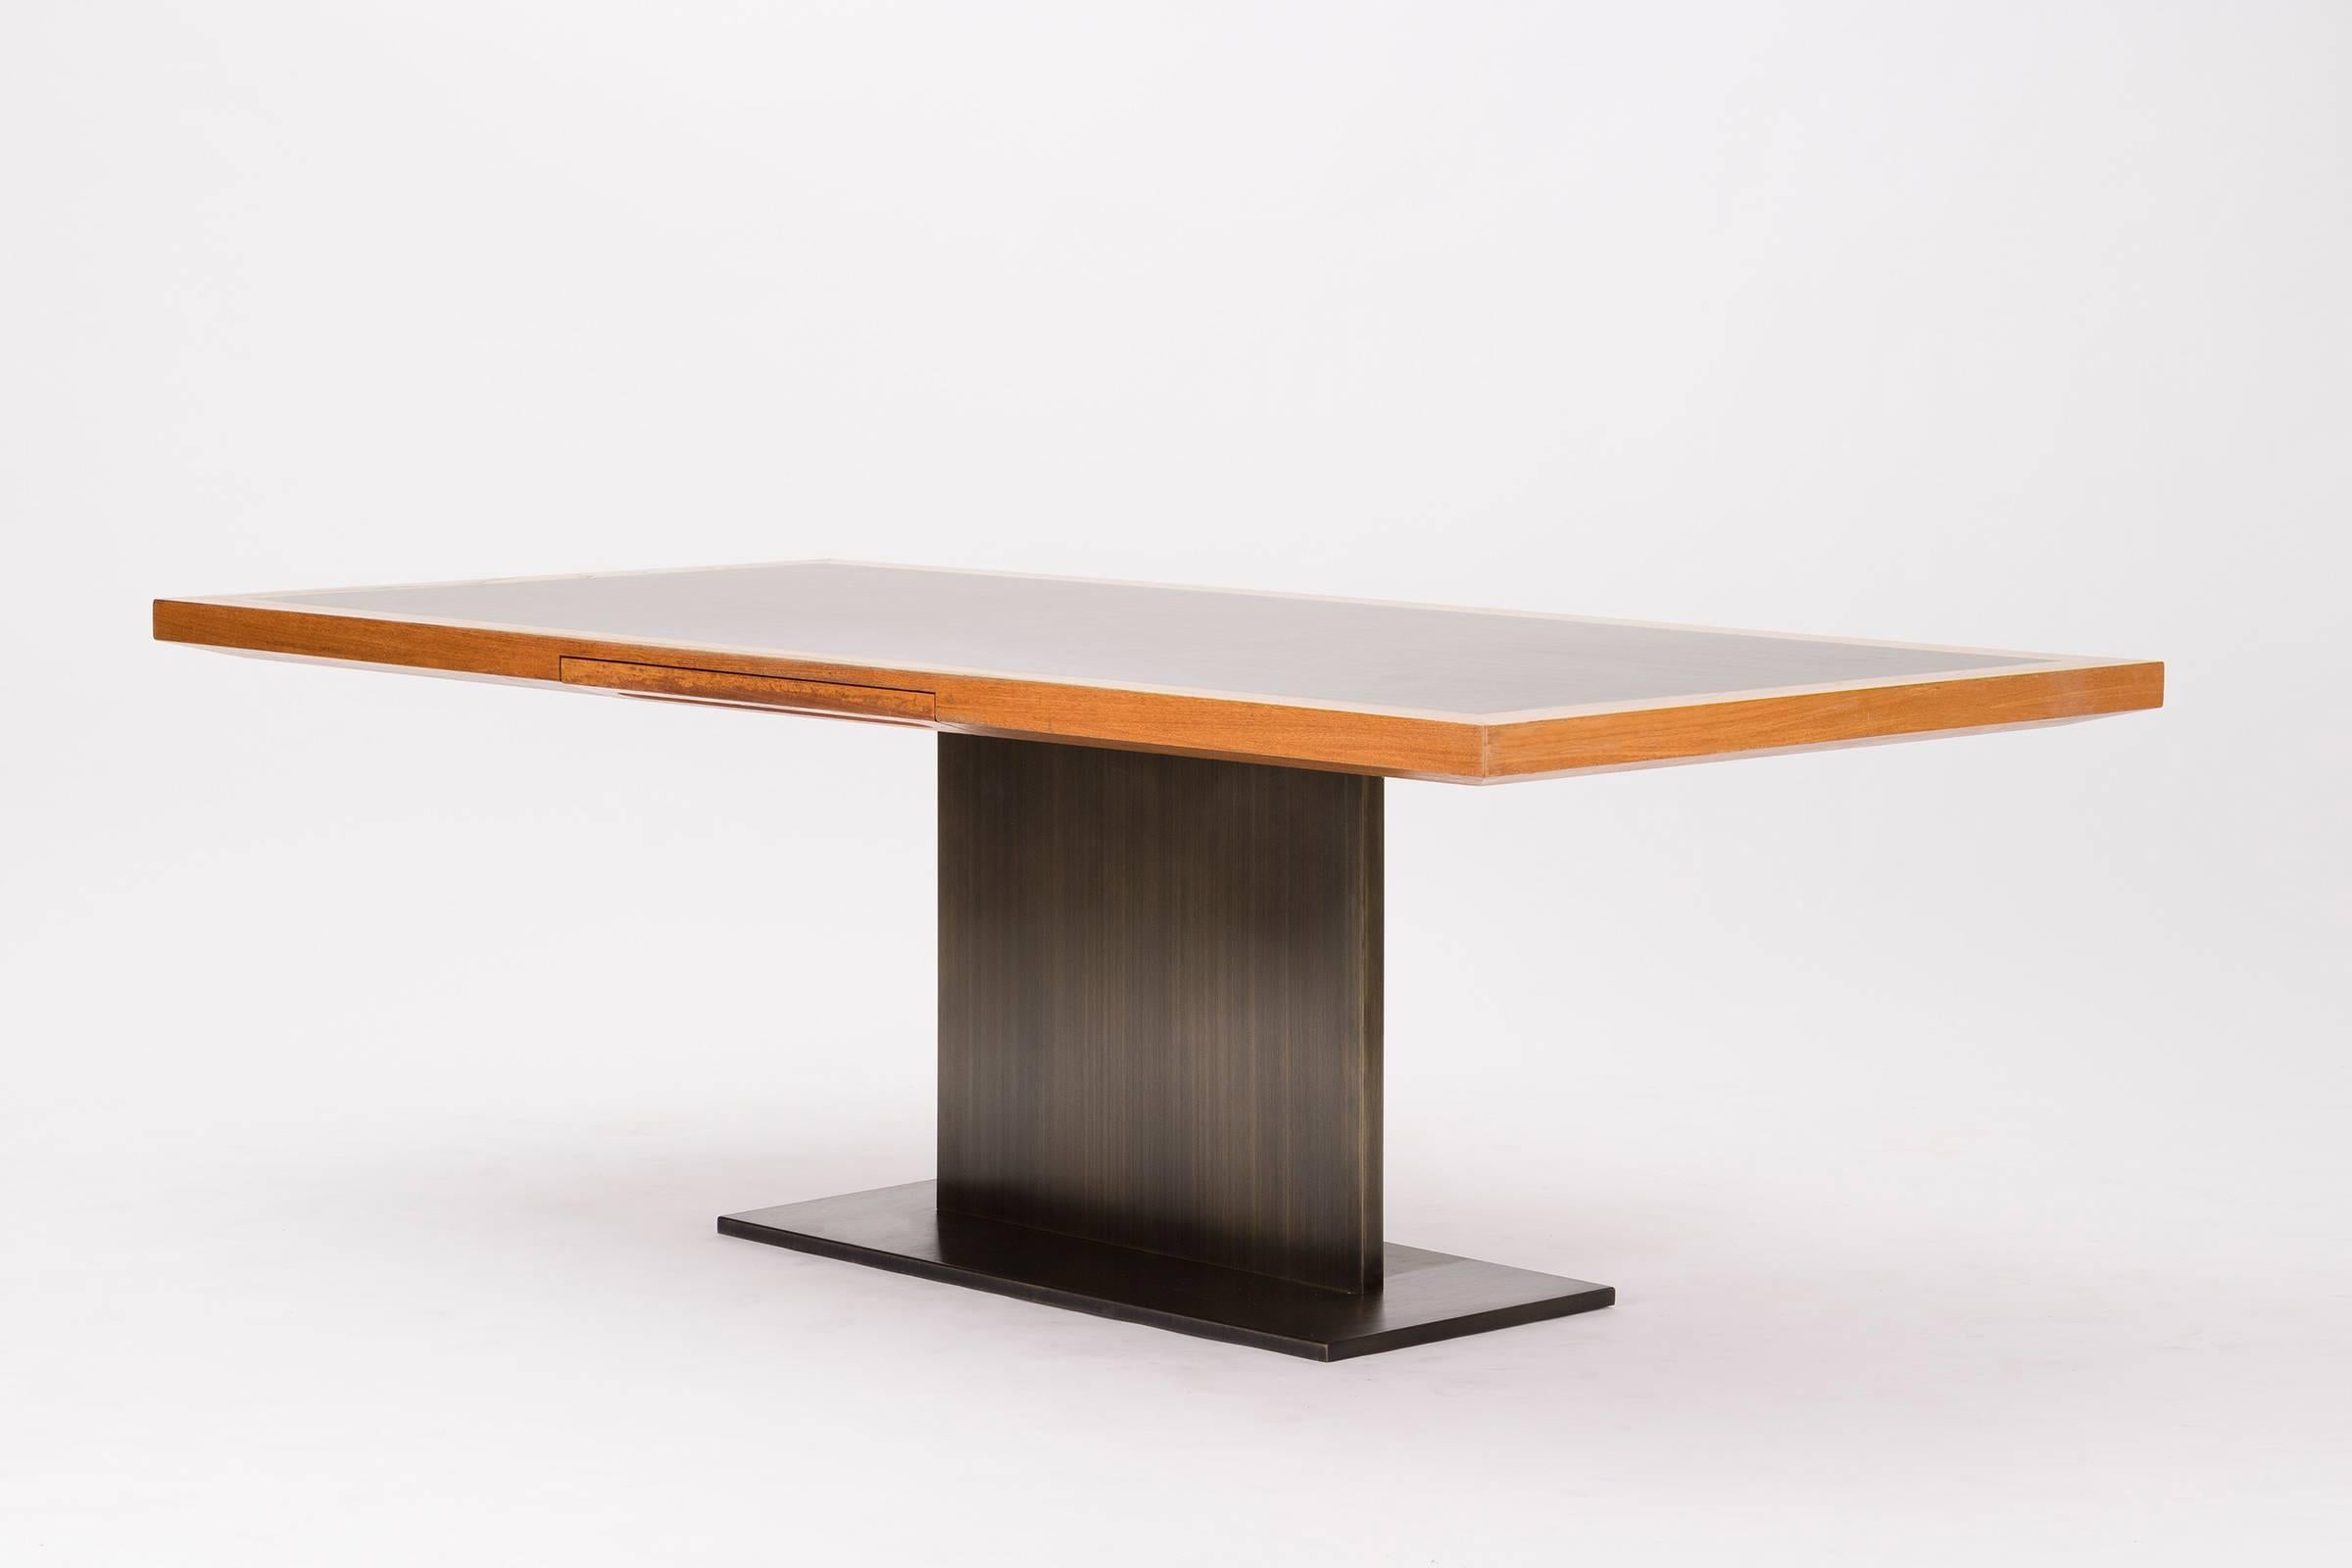 Platner for Lehigh Leopold desk, features single pencil drawer with walnut top and laminate surface, bronze base.